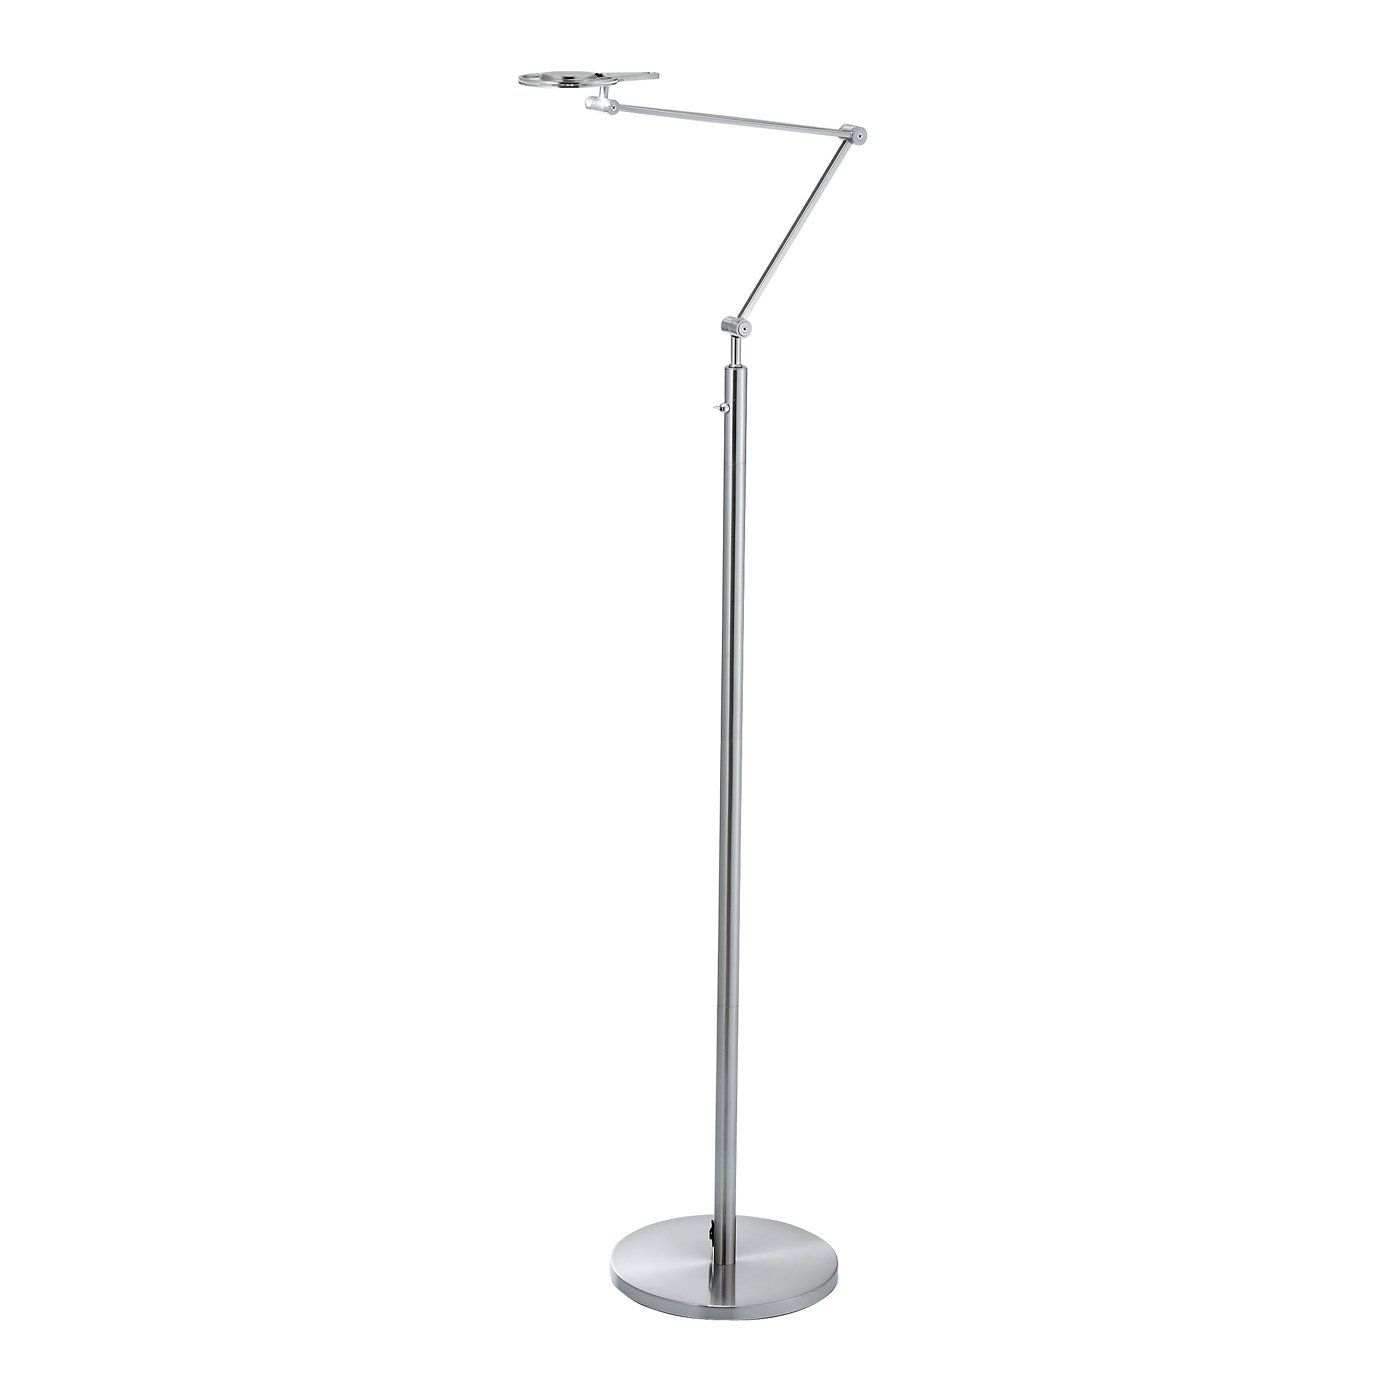 Adesso Lighting 5081 22 Orion Floor Lamp Lighting Universe for size 1400 X 1400